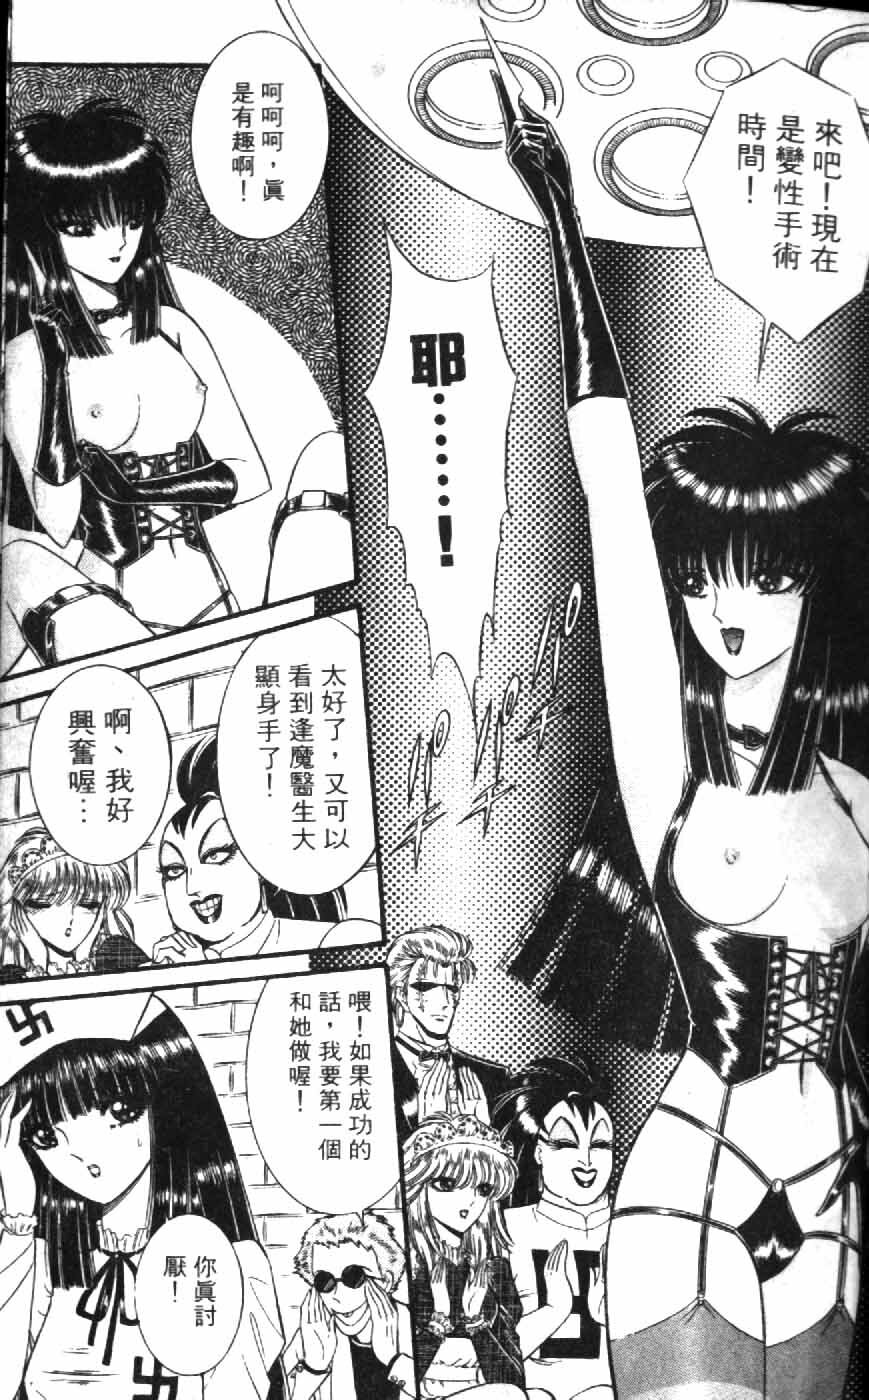 [Senno Knife] Ouma ga Horror Show 1 - Trans Sexual Special Show 1 | 顫慄博覽會 1 [Chinese] page 43 full